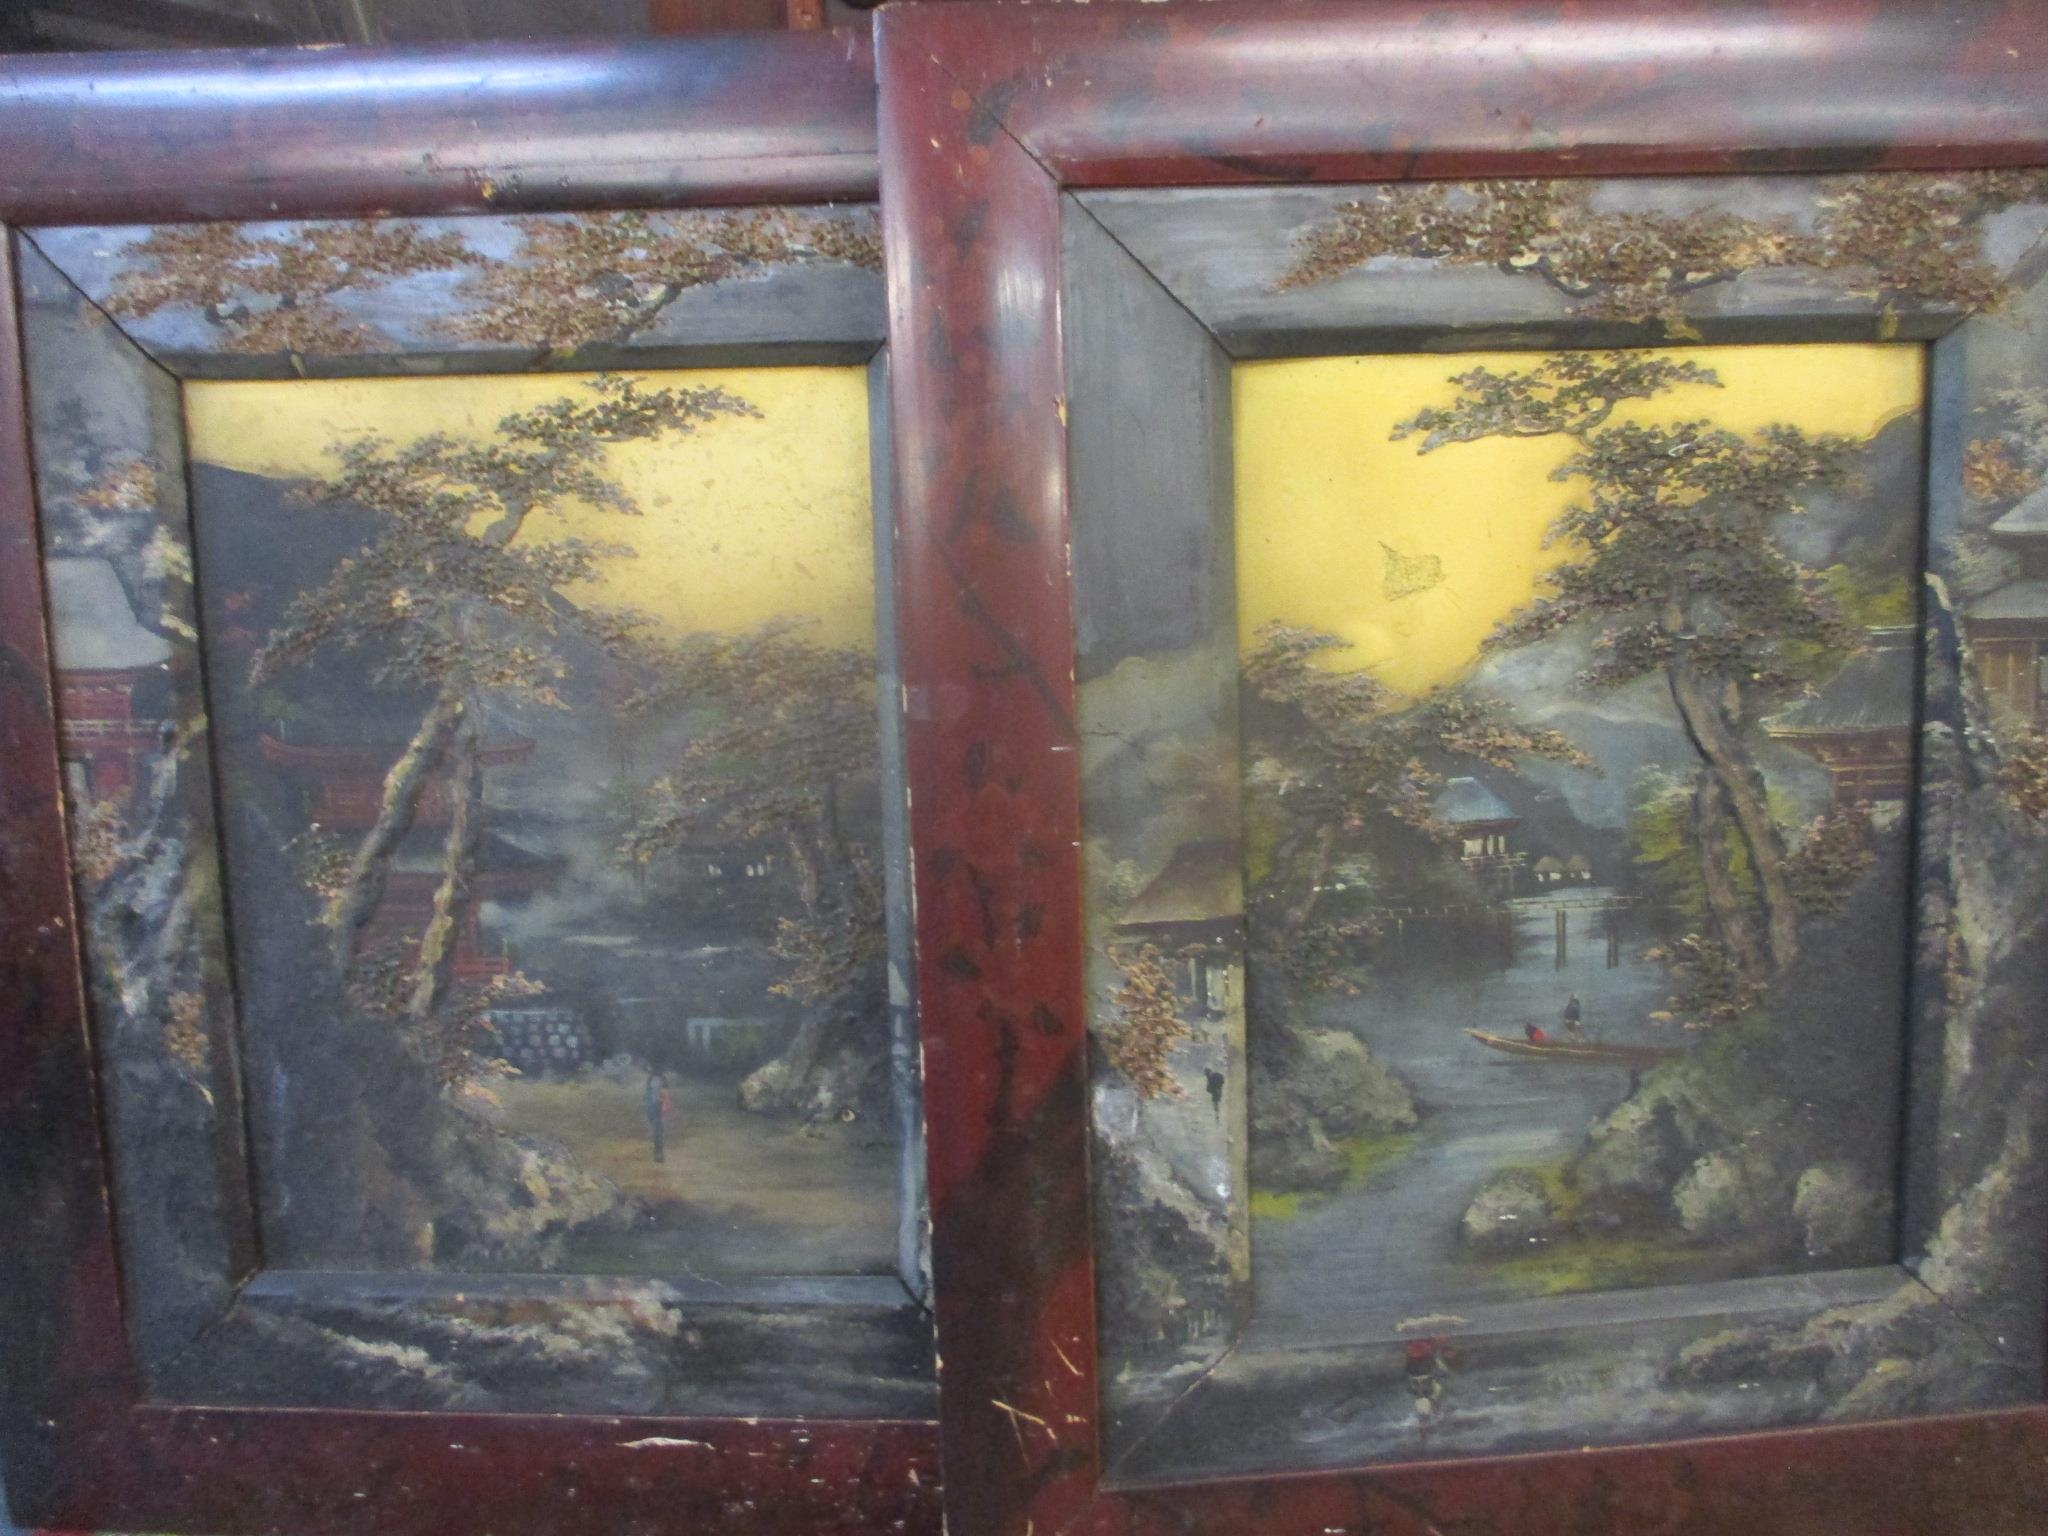 A pair of mid 20th century Oriental oils on board with the painting blending into the mount framed